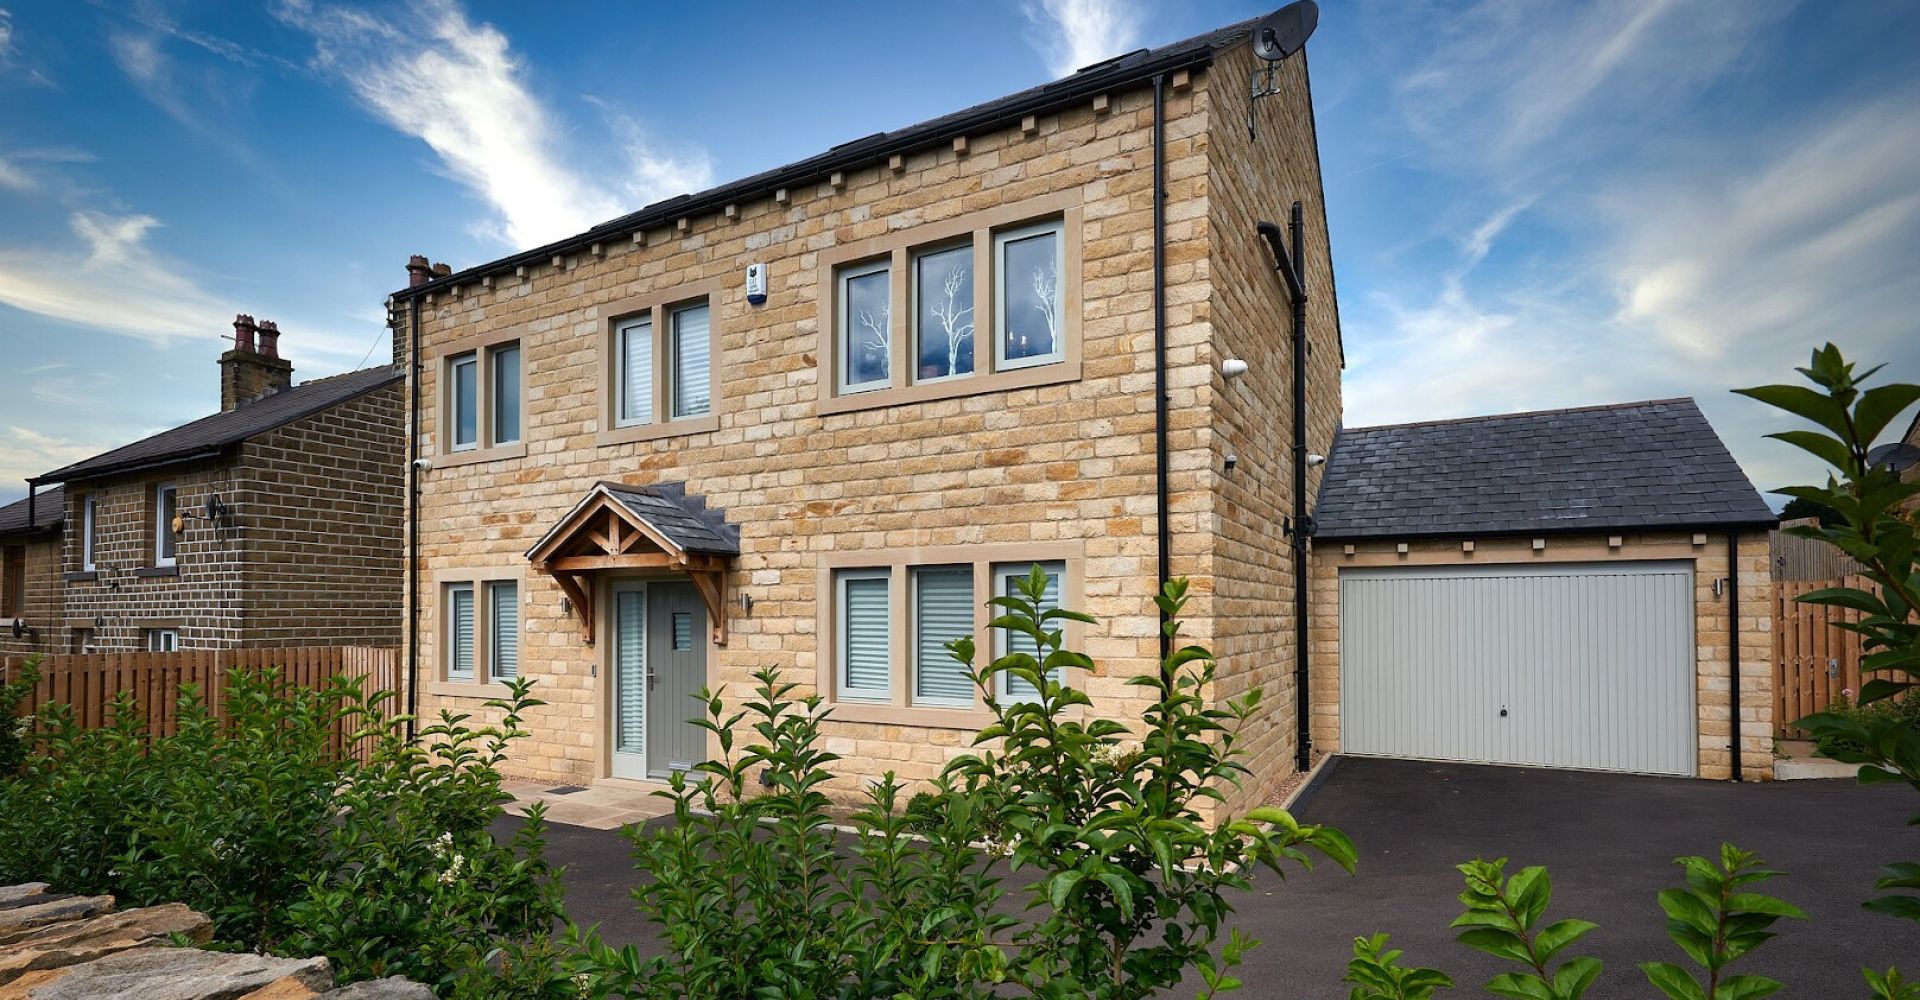 5 bedroom detached new build homes in traditional stone, Longwood, Huddersfield